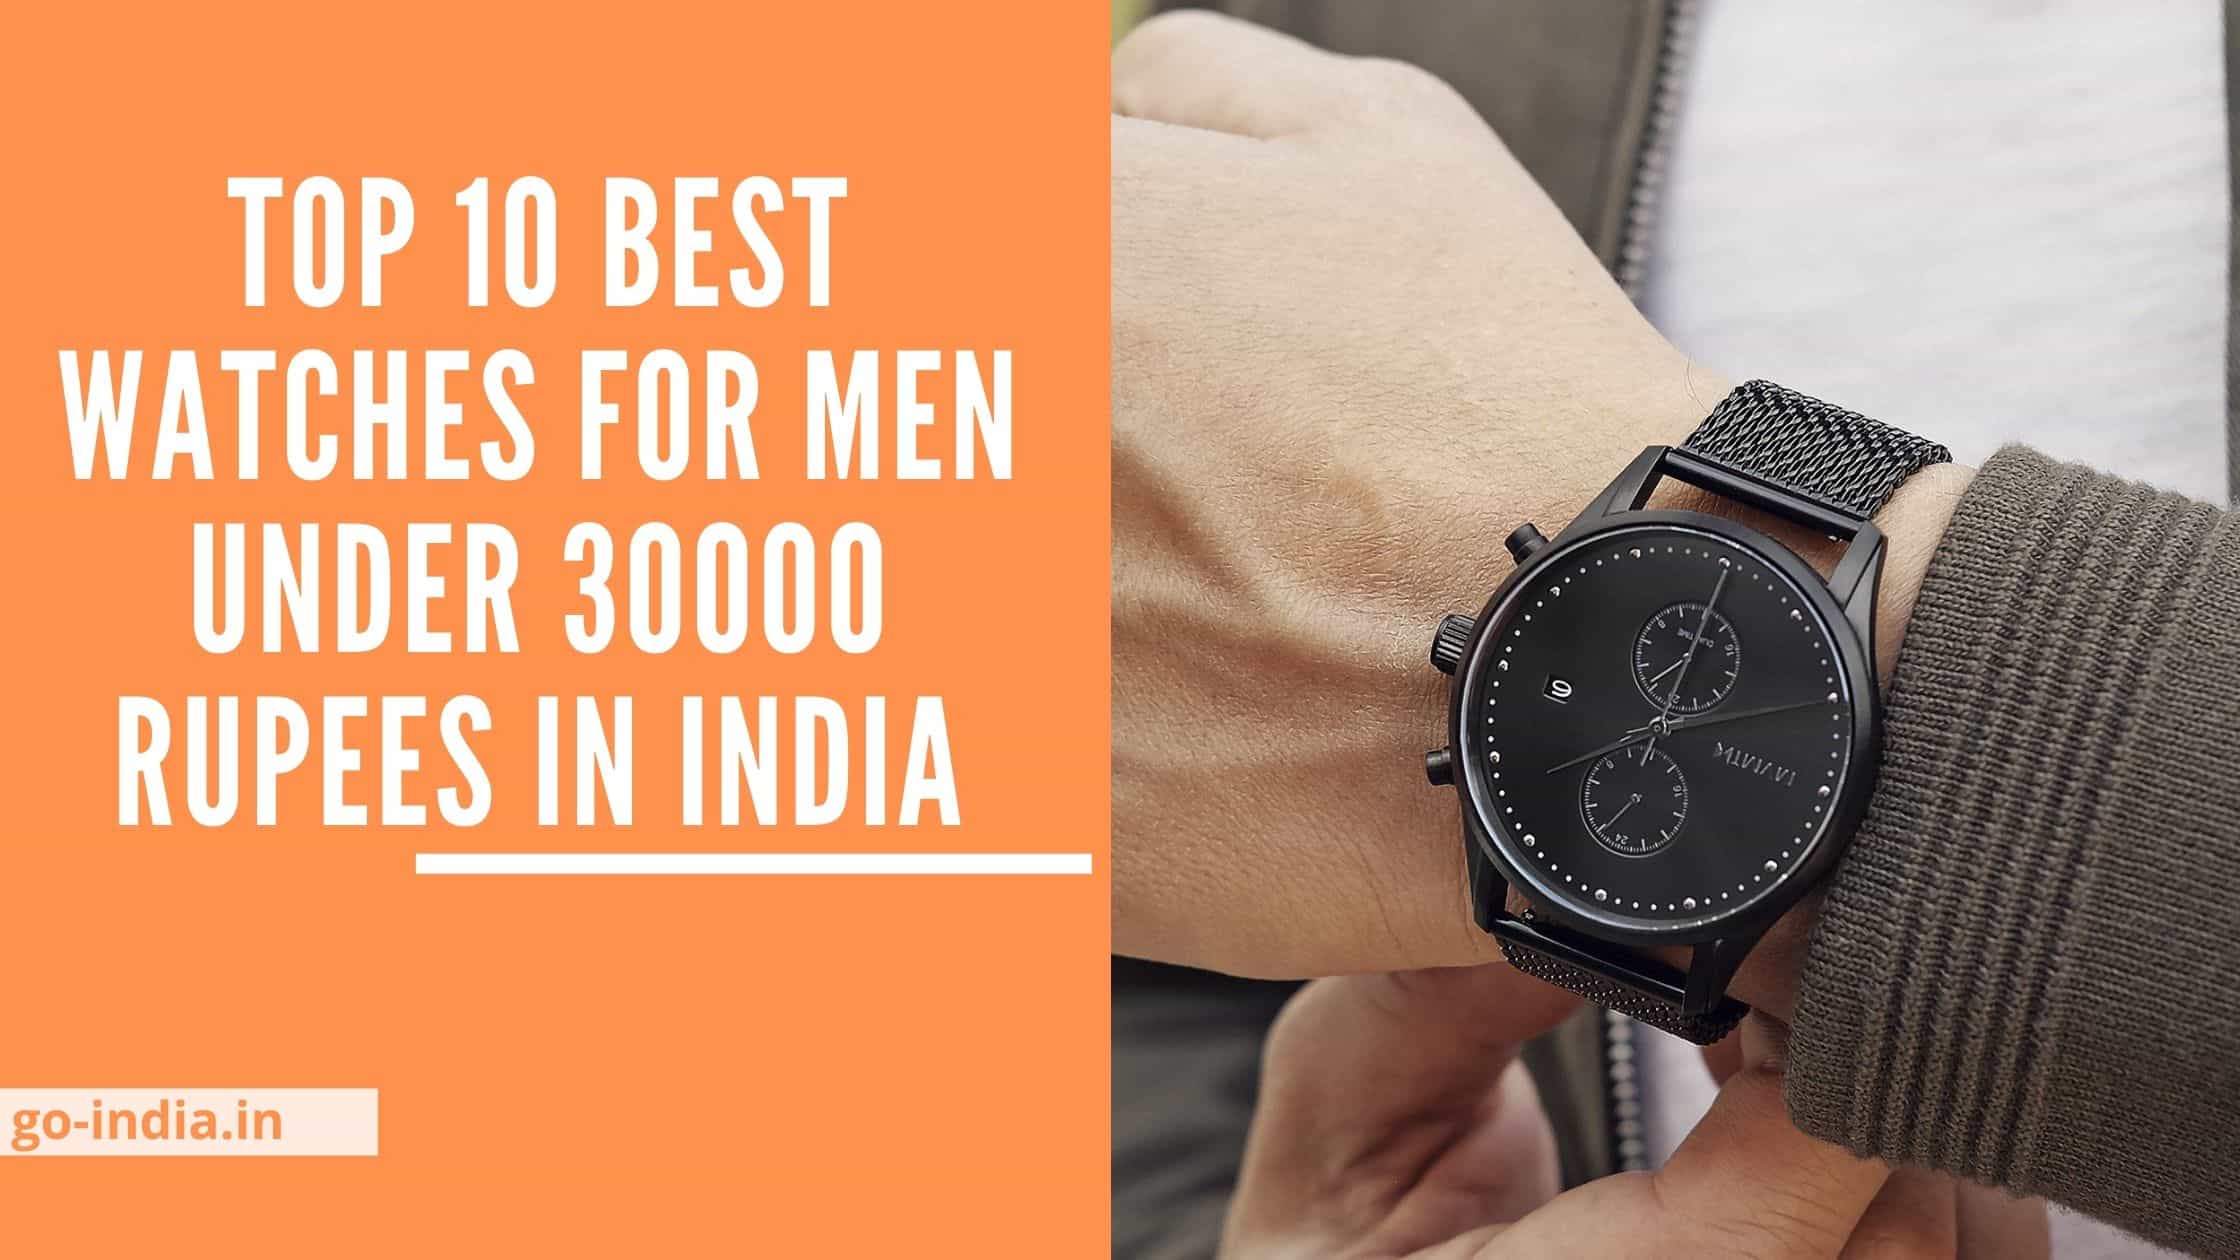 Top 10 Best Watches For Men Under 30000 Rupees in India 2022